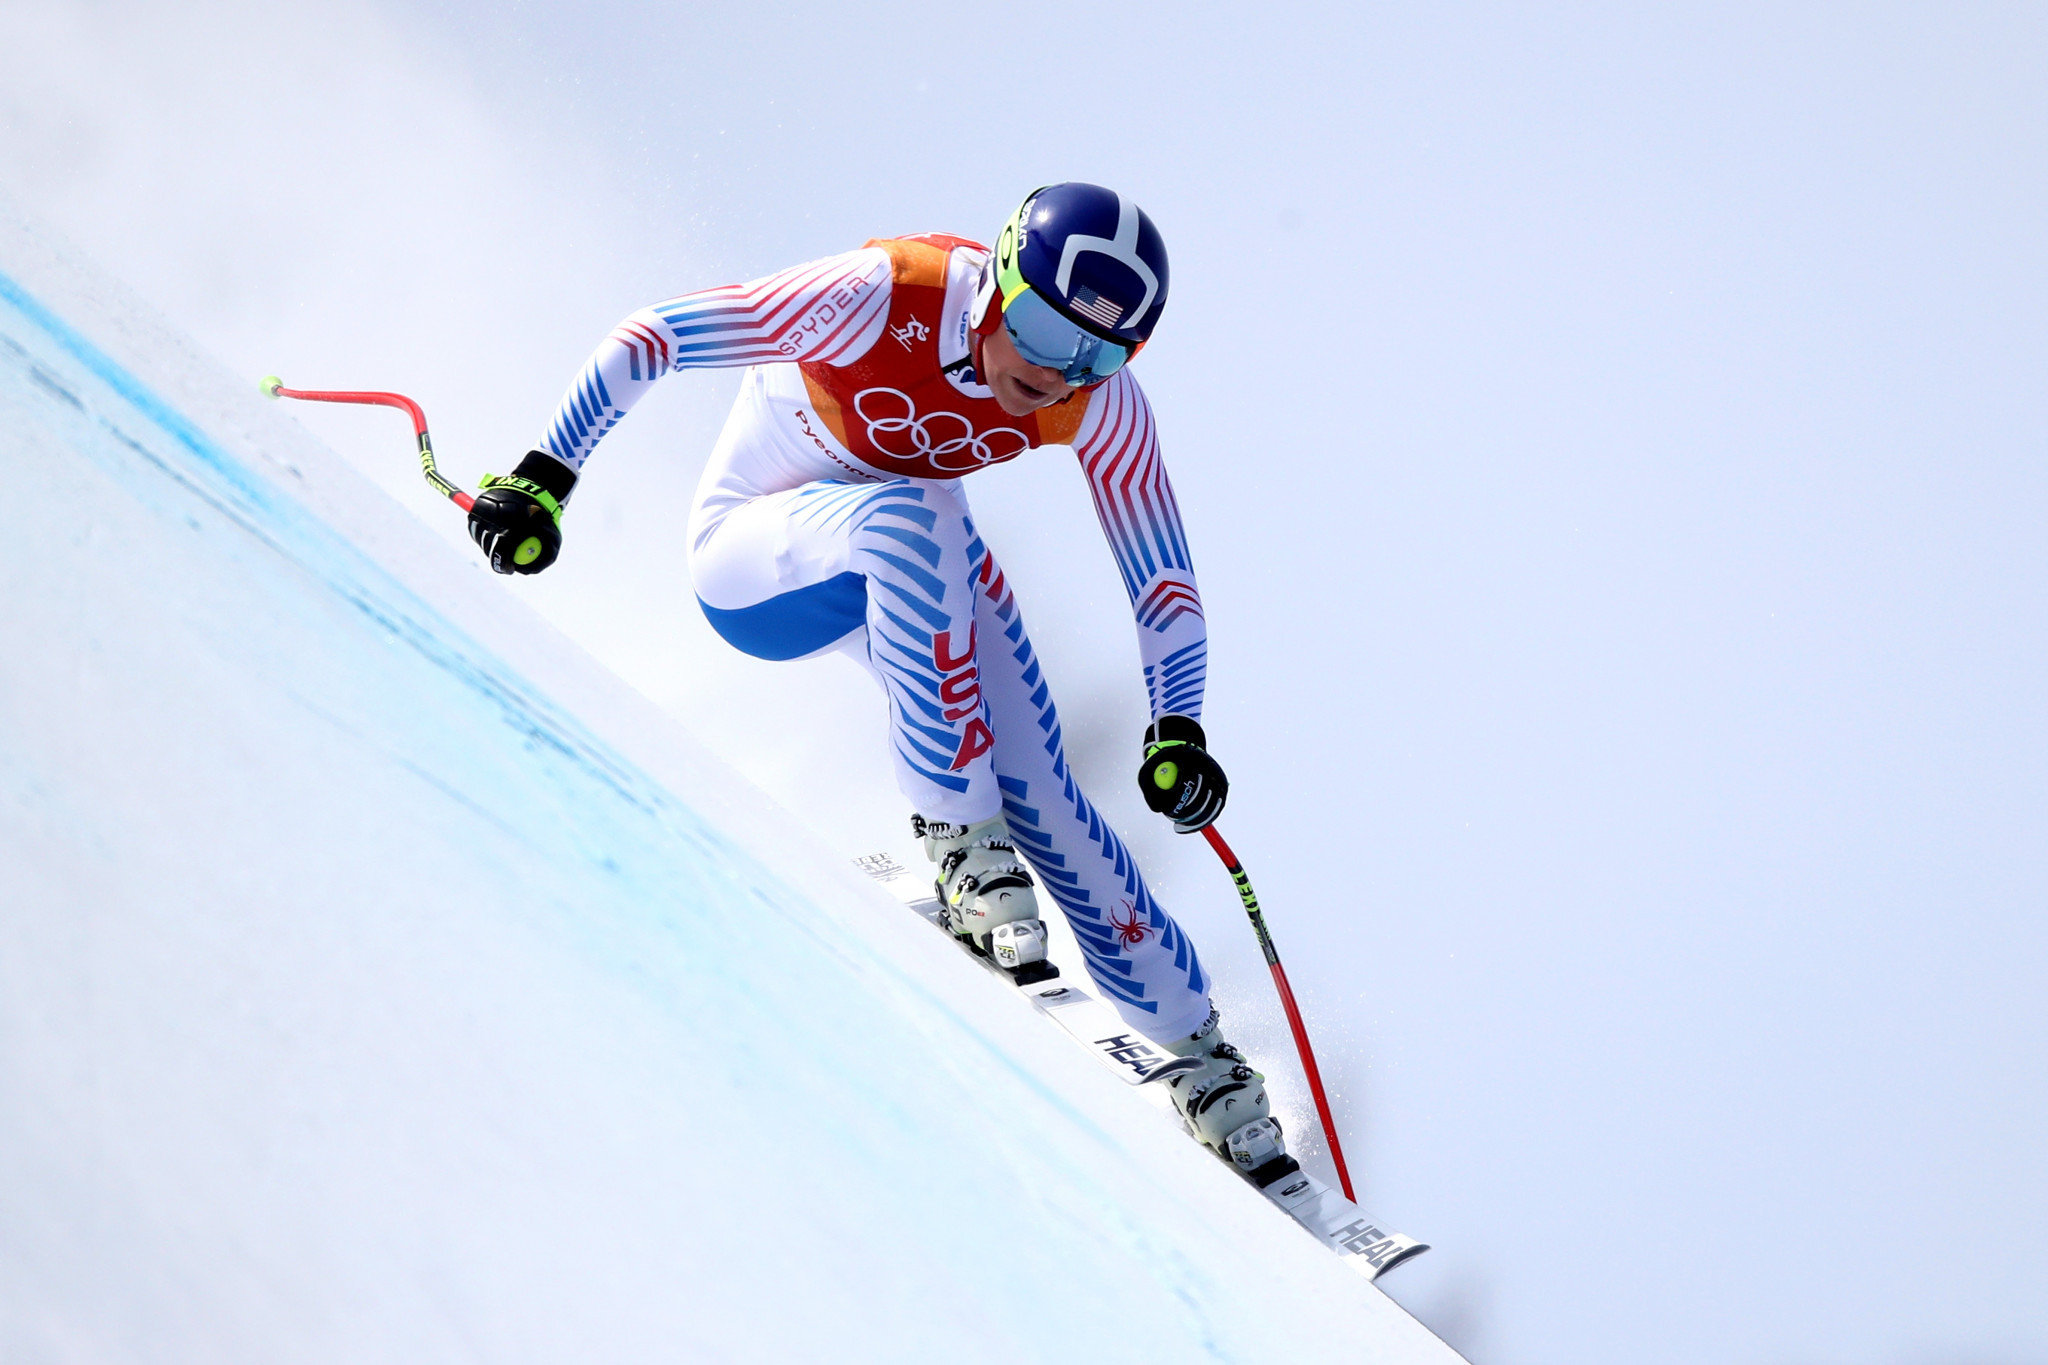 American Lindsey Vonn had to settle for the bronze medal in what is likely to be her last Olympic downhill race ©Getty Images
